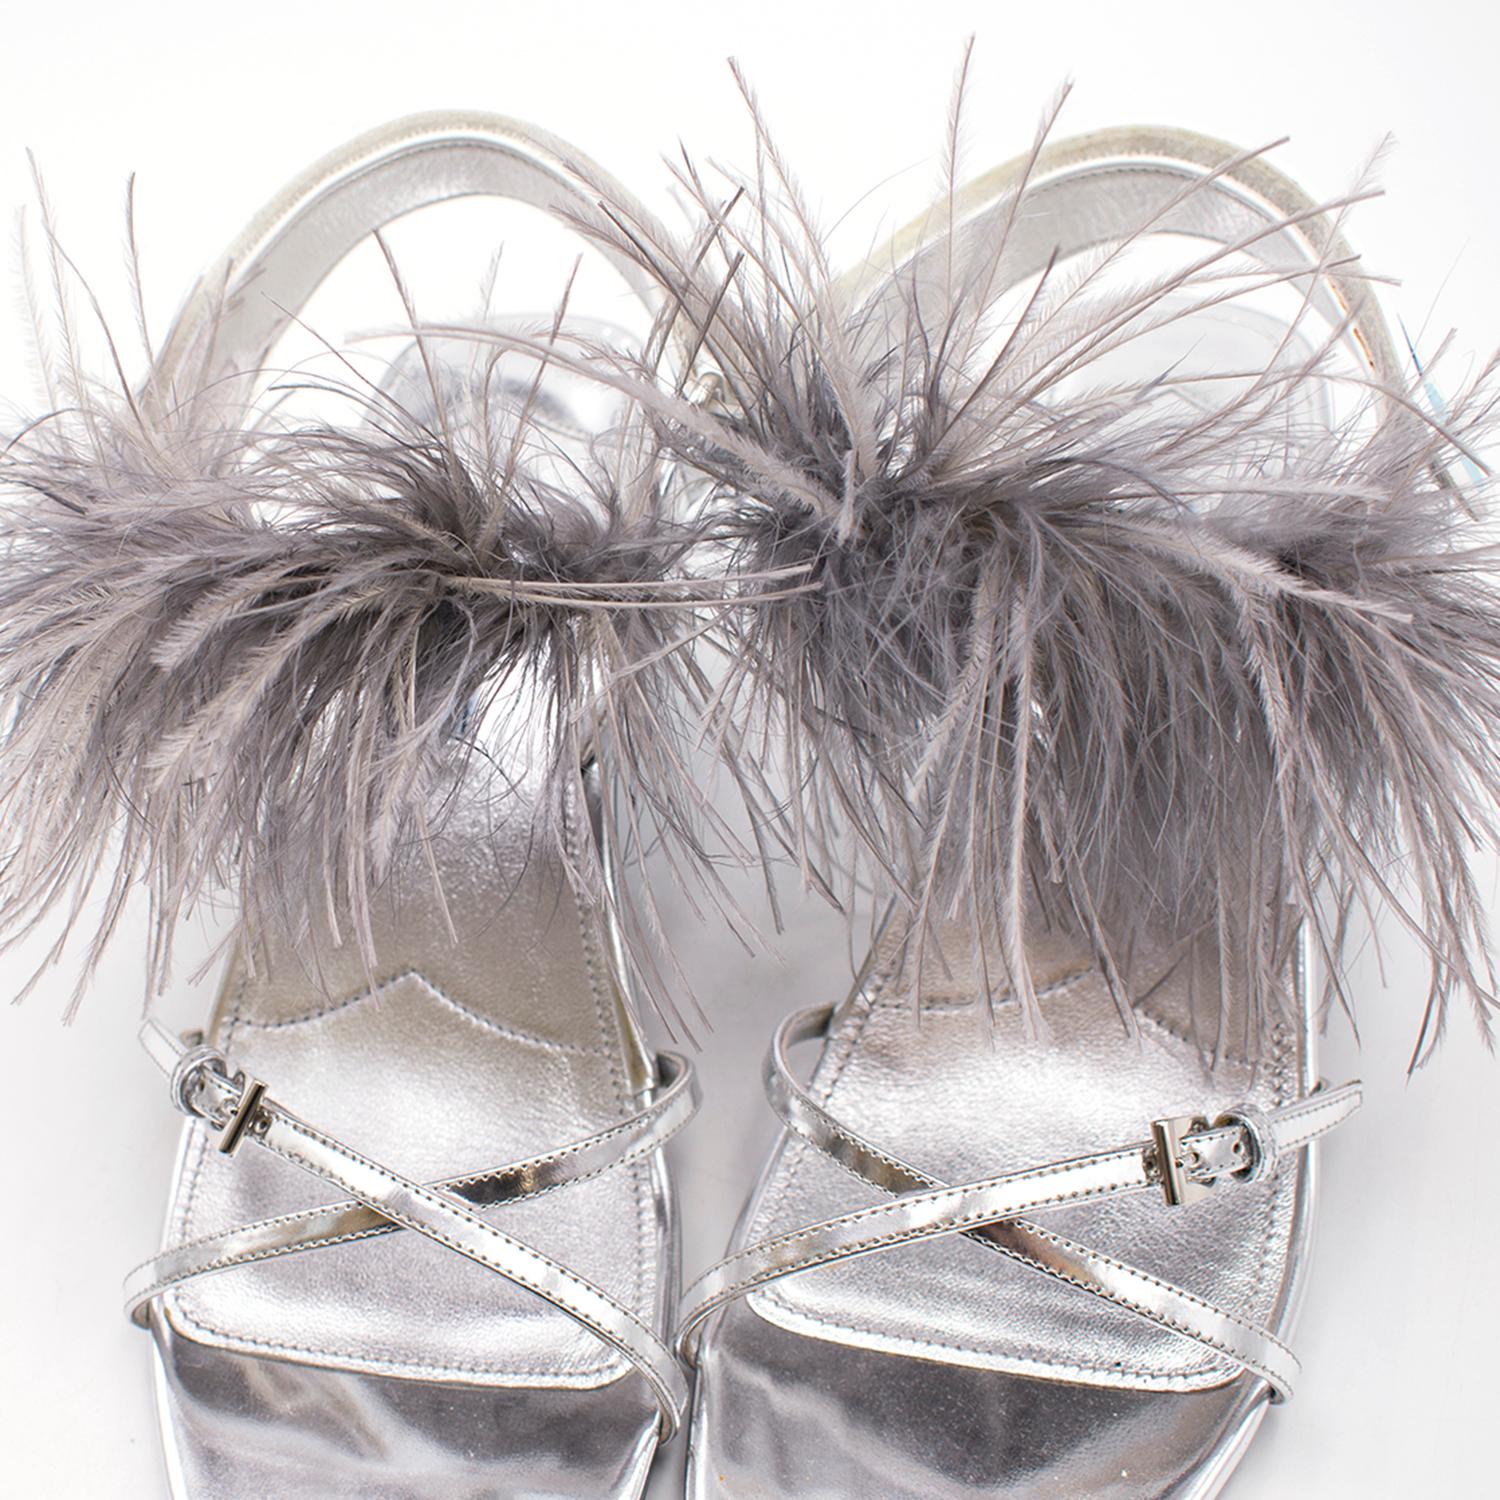 Prada Strap Feather Slingback Sandals

- Criss-cross straps 
- Open toe
- Slingback style with contrast velcro straps
- Grey ostrich feather detailing around the front of the ankle 
- Statement, abstract kitten heel

Sizing: US 9.5

Approx.
Heel